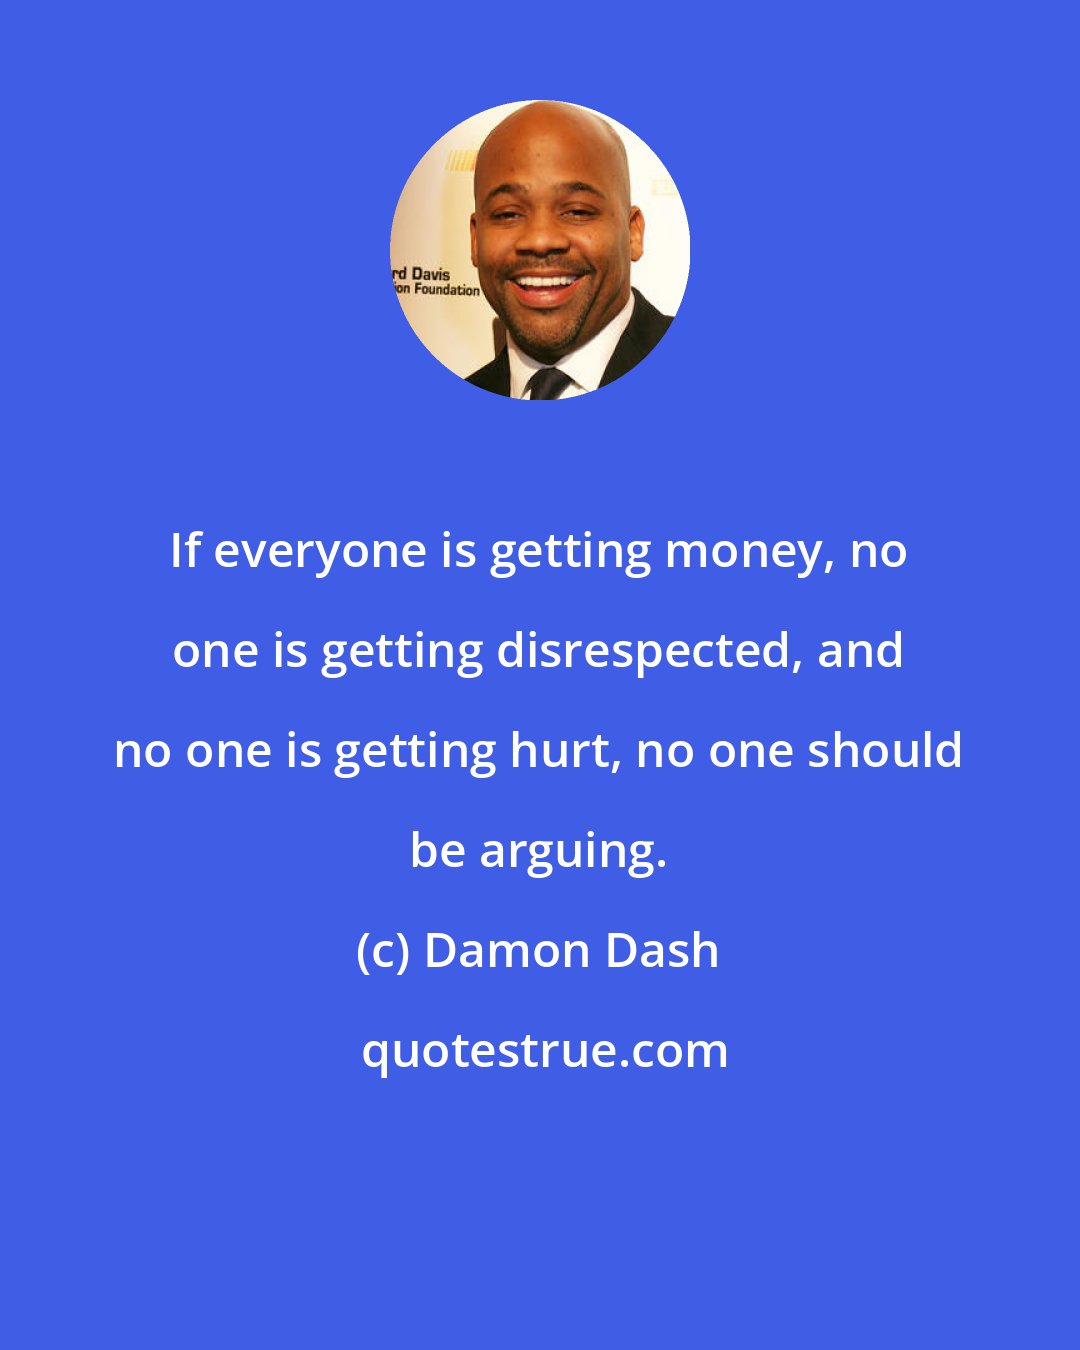 Damon Dash: If everyone is getting money, no one is getting disrespected, and no one is getting hurt, no one should be arguing.